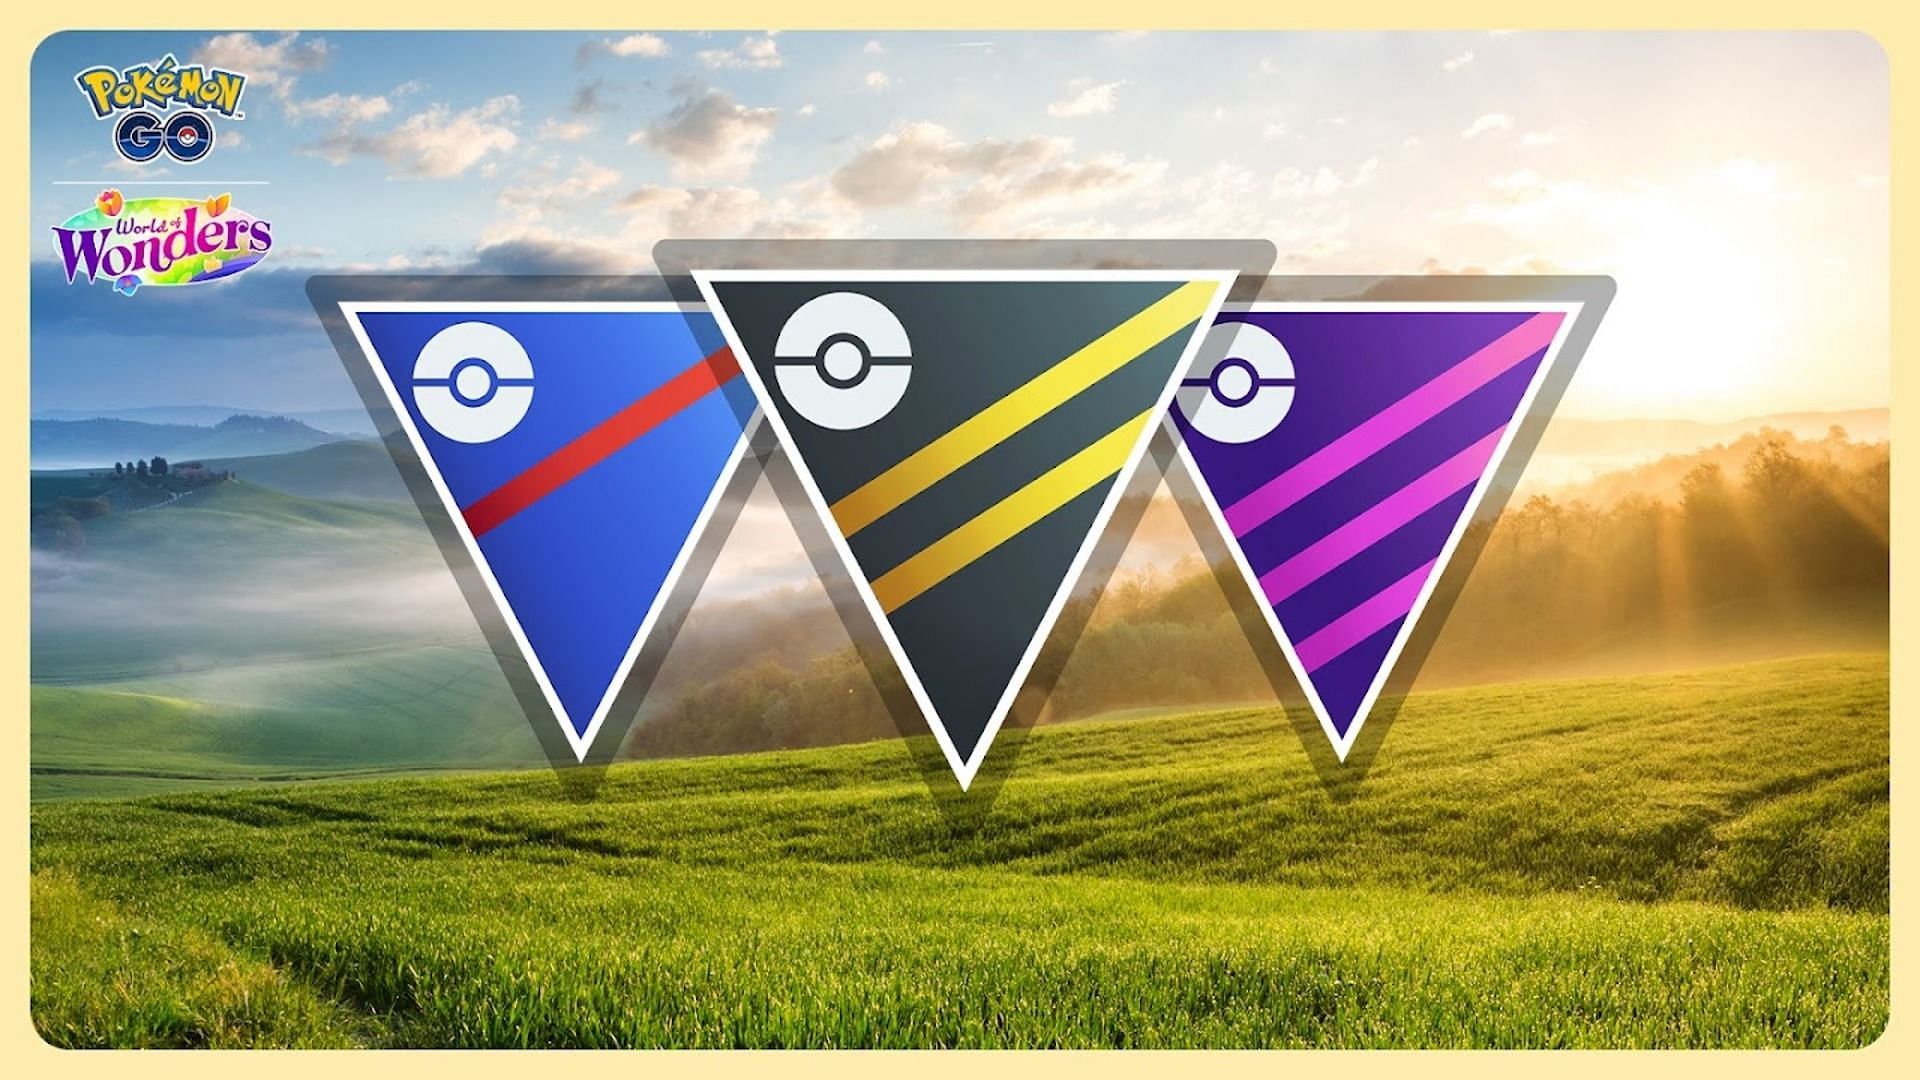 The hardcore competitive scene for Pokemon GO is a large contributor to repeated play sessions for many fans (Image via Niantic)